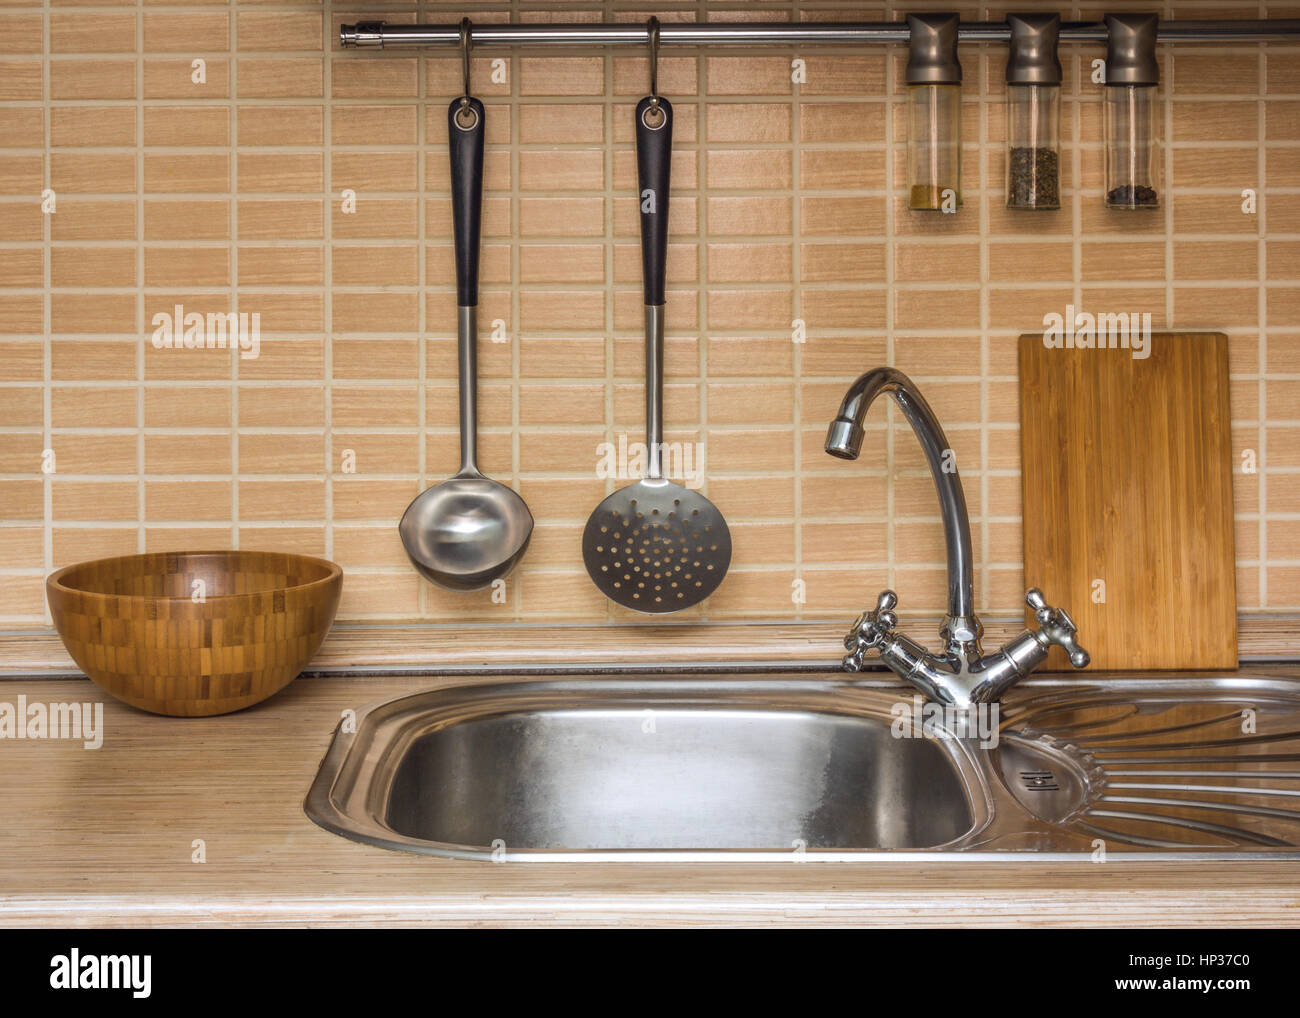 A part of an interior of home kitchen with utensils Stock Photo